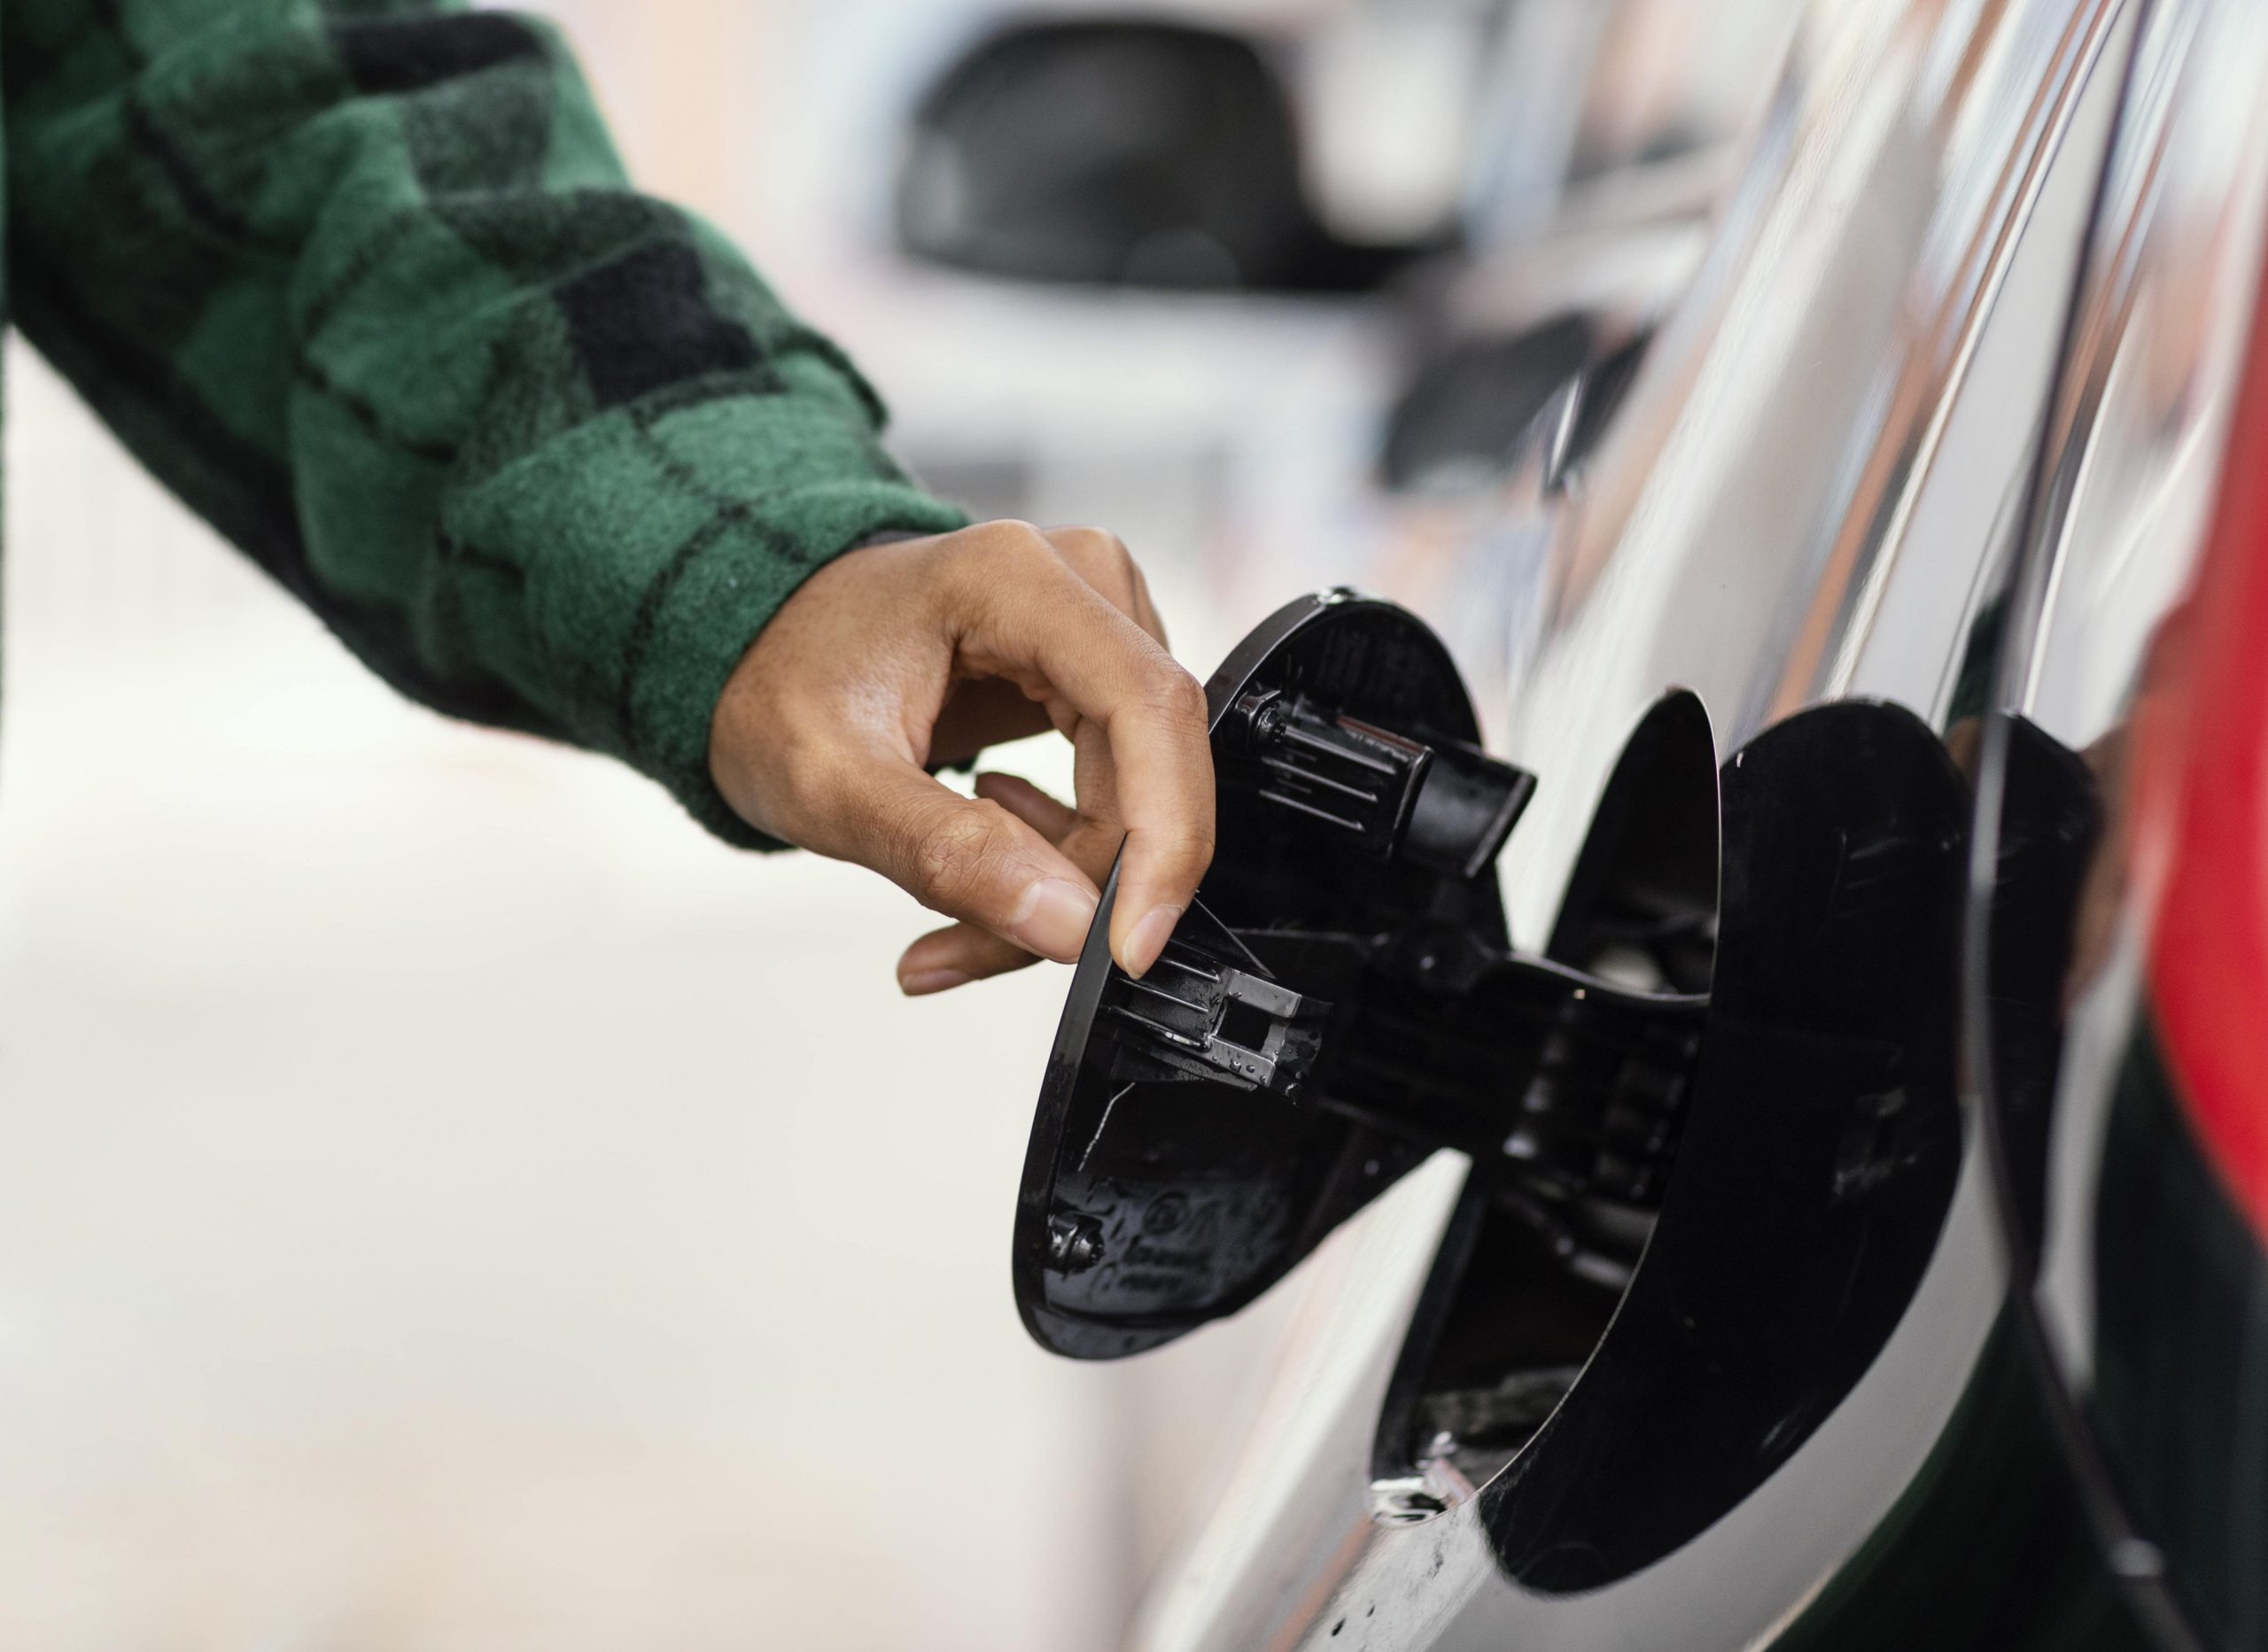 Save Money on Gas: Ways to Cut Costs at the Pump & via Maintenance (11)